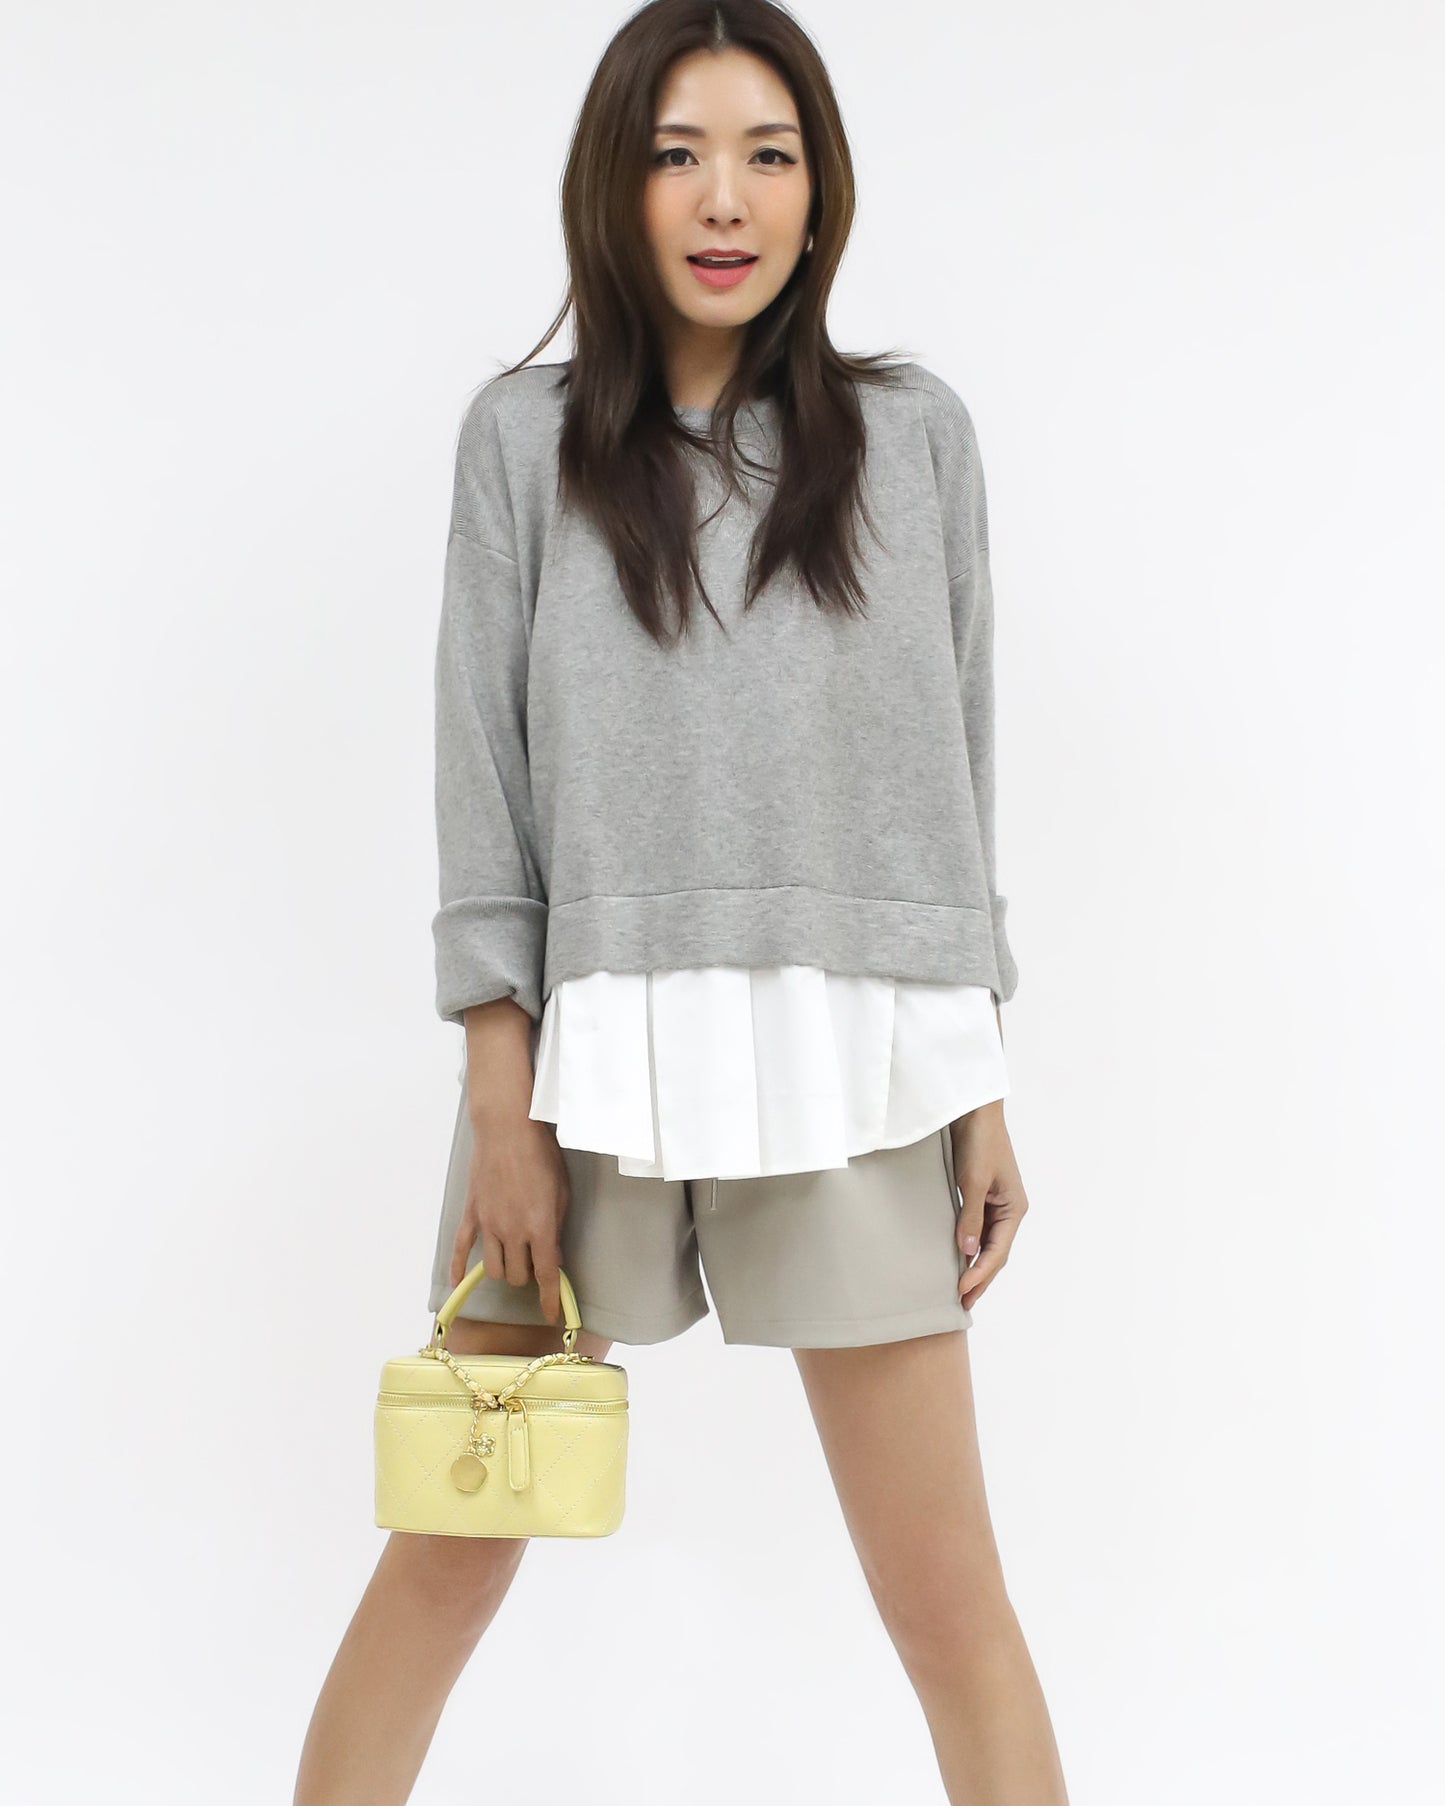 grey knitted w/ ivory pleats shirt layer top